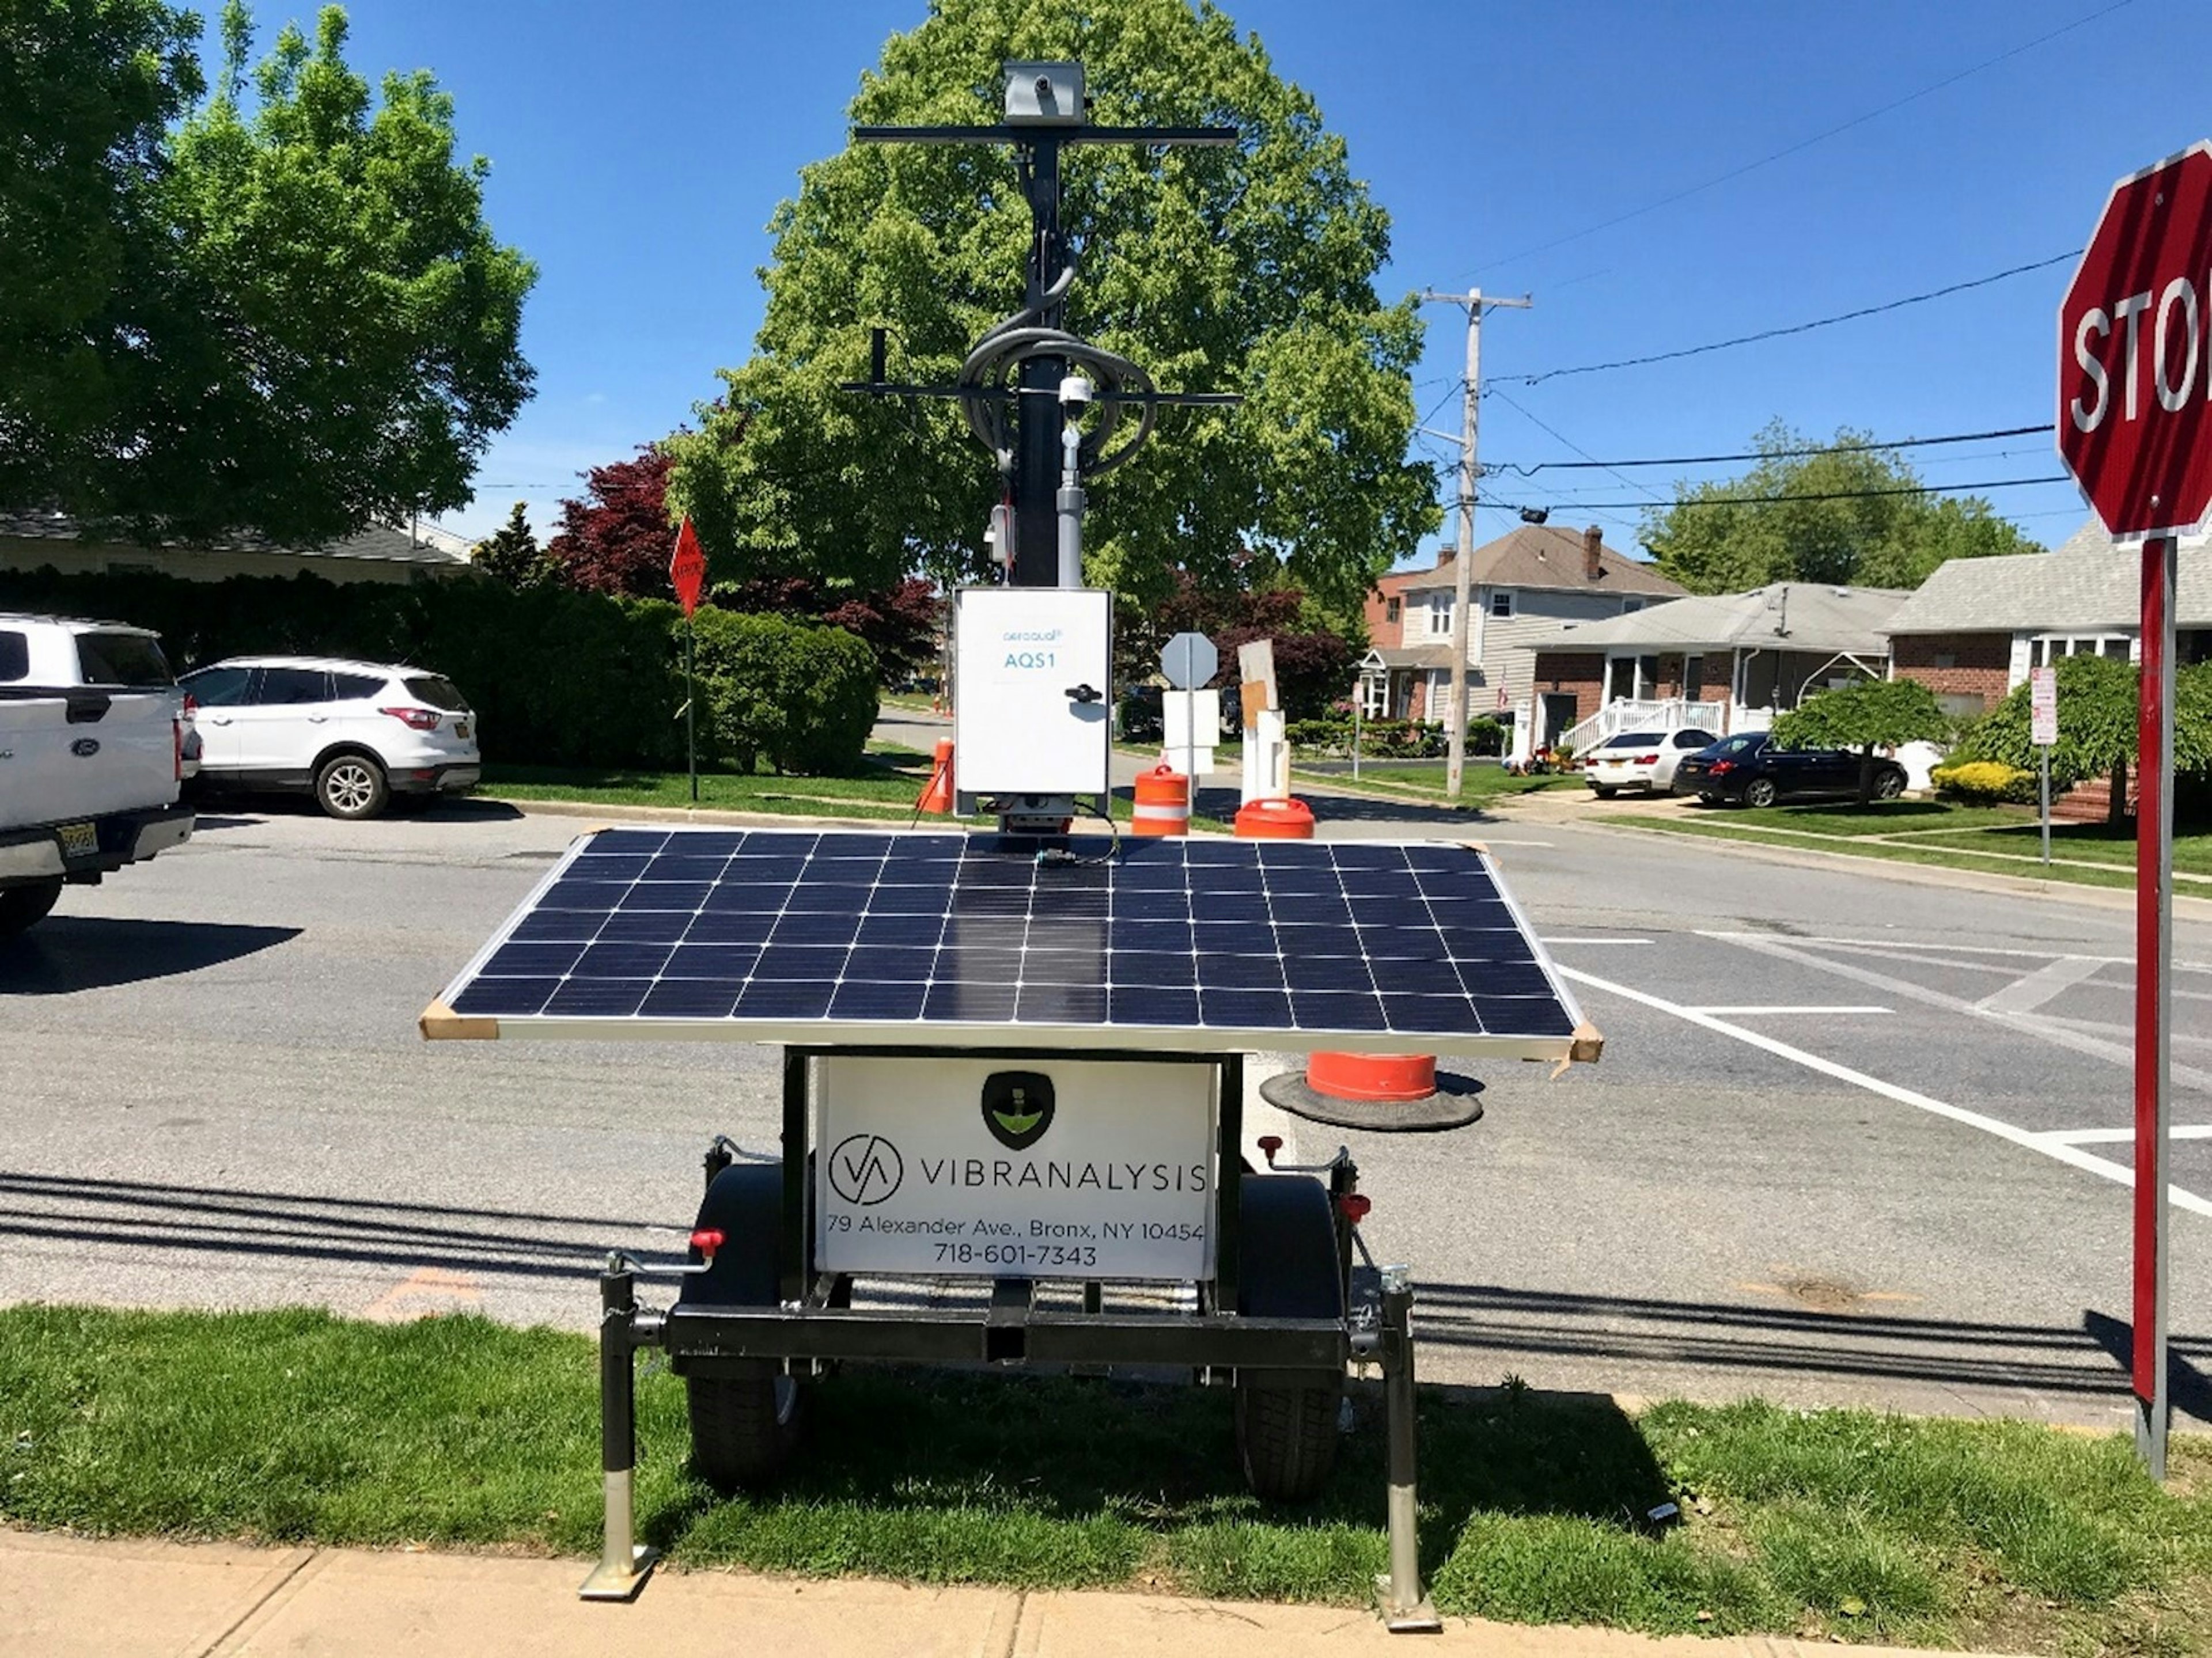 Light weight battery and solar power options available